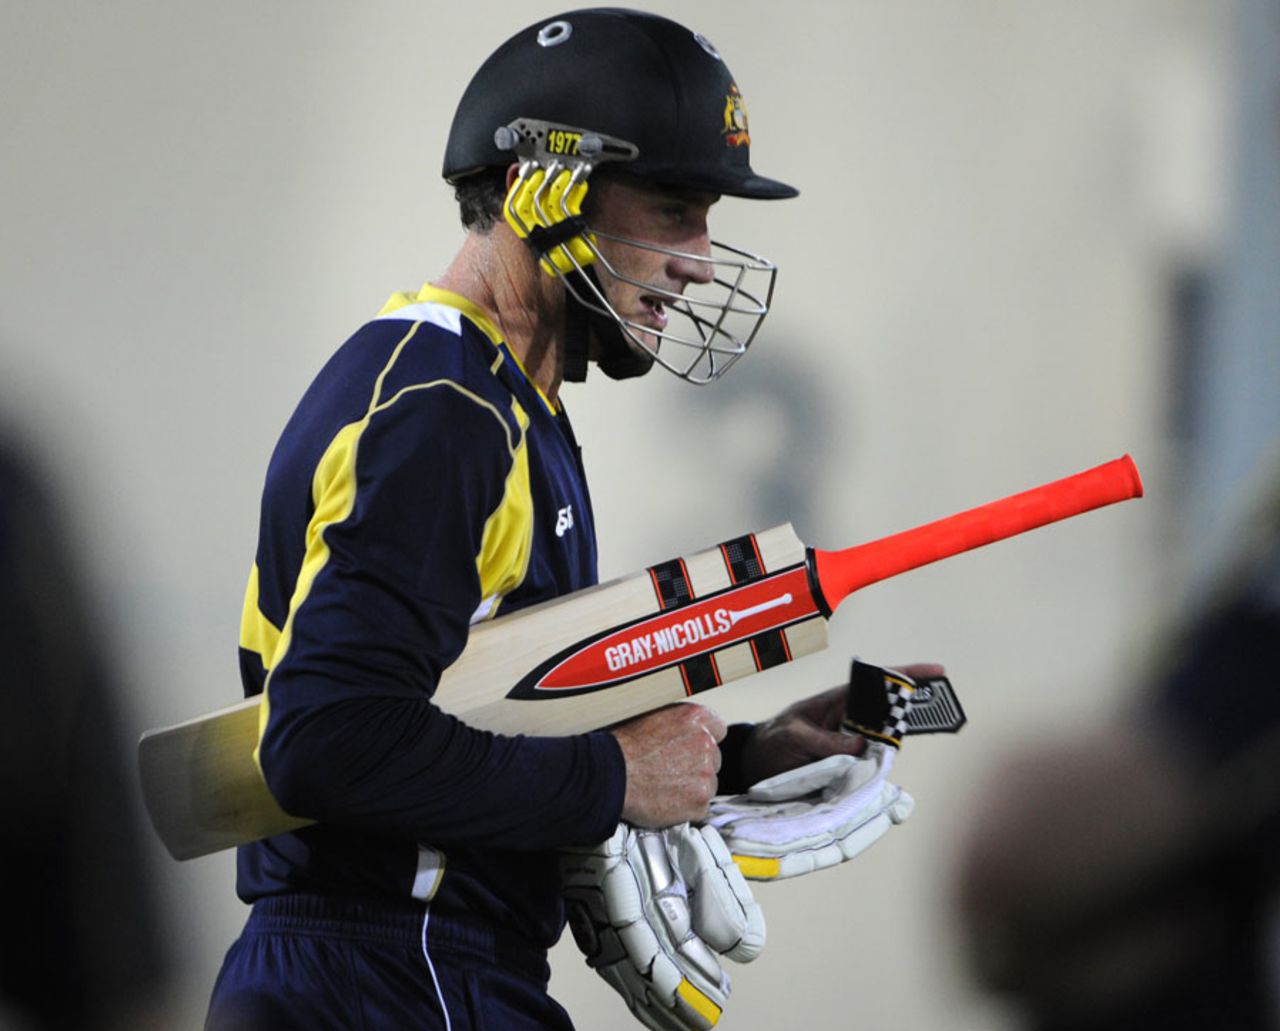 David Hussey at the nets in Sharjah ahead of the first ODI, Sharjah, August 27, 2012